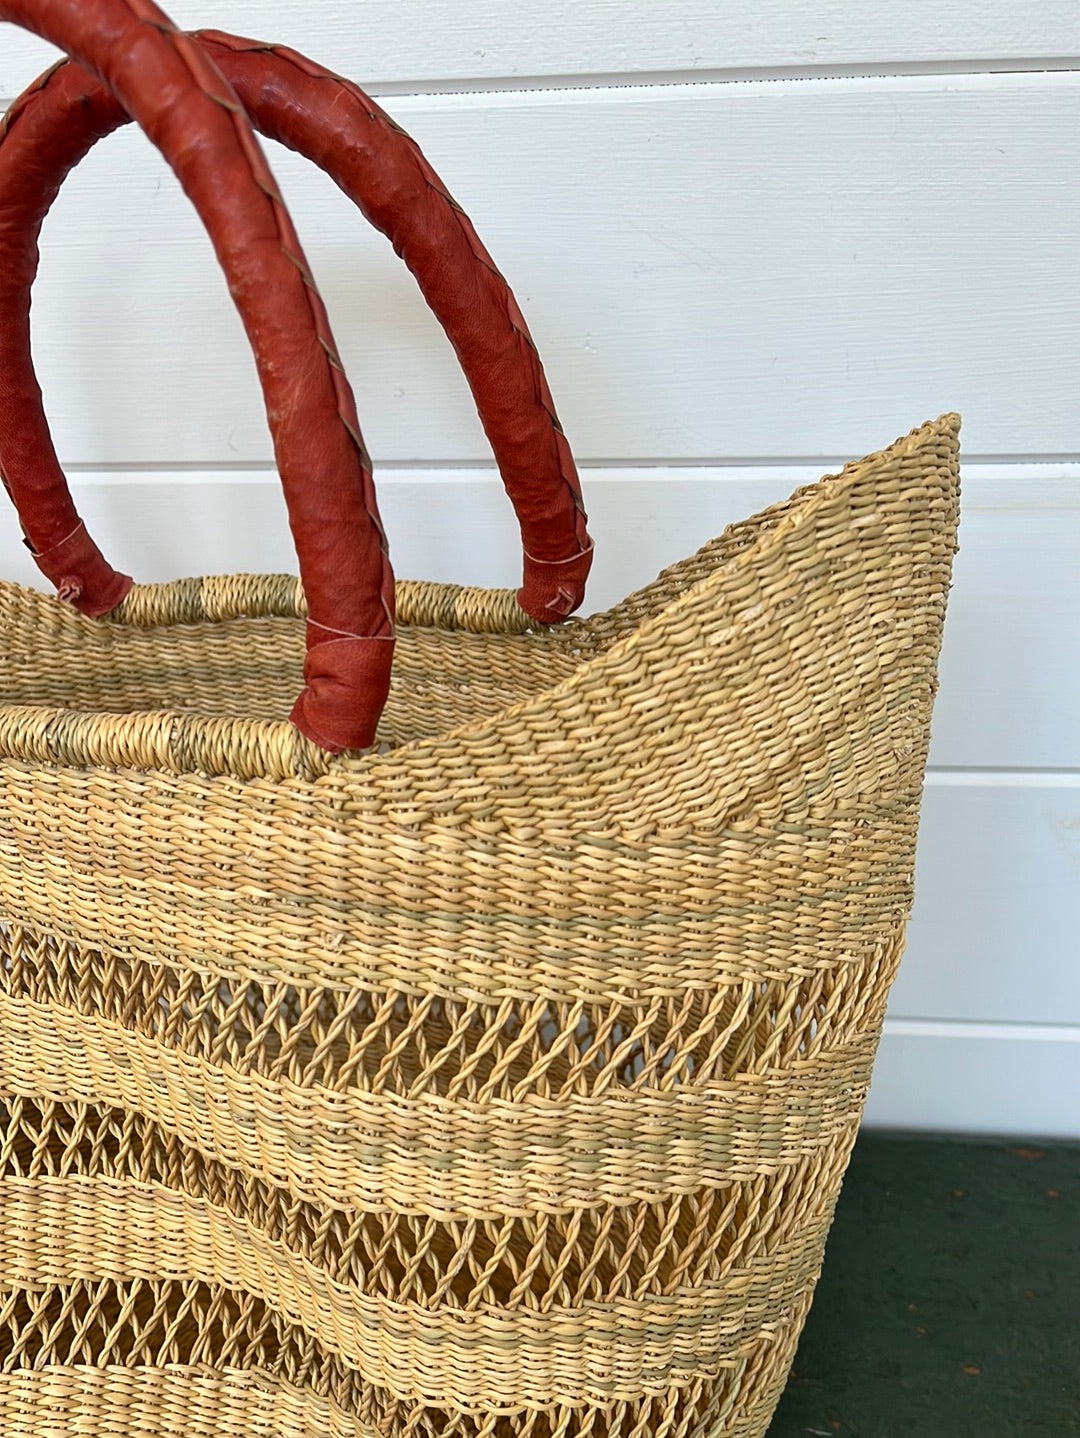 African Lace Basket w/ Leather Handle - Tan